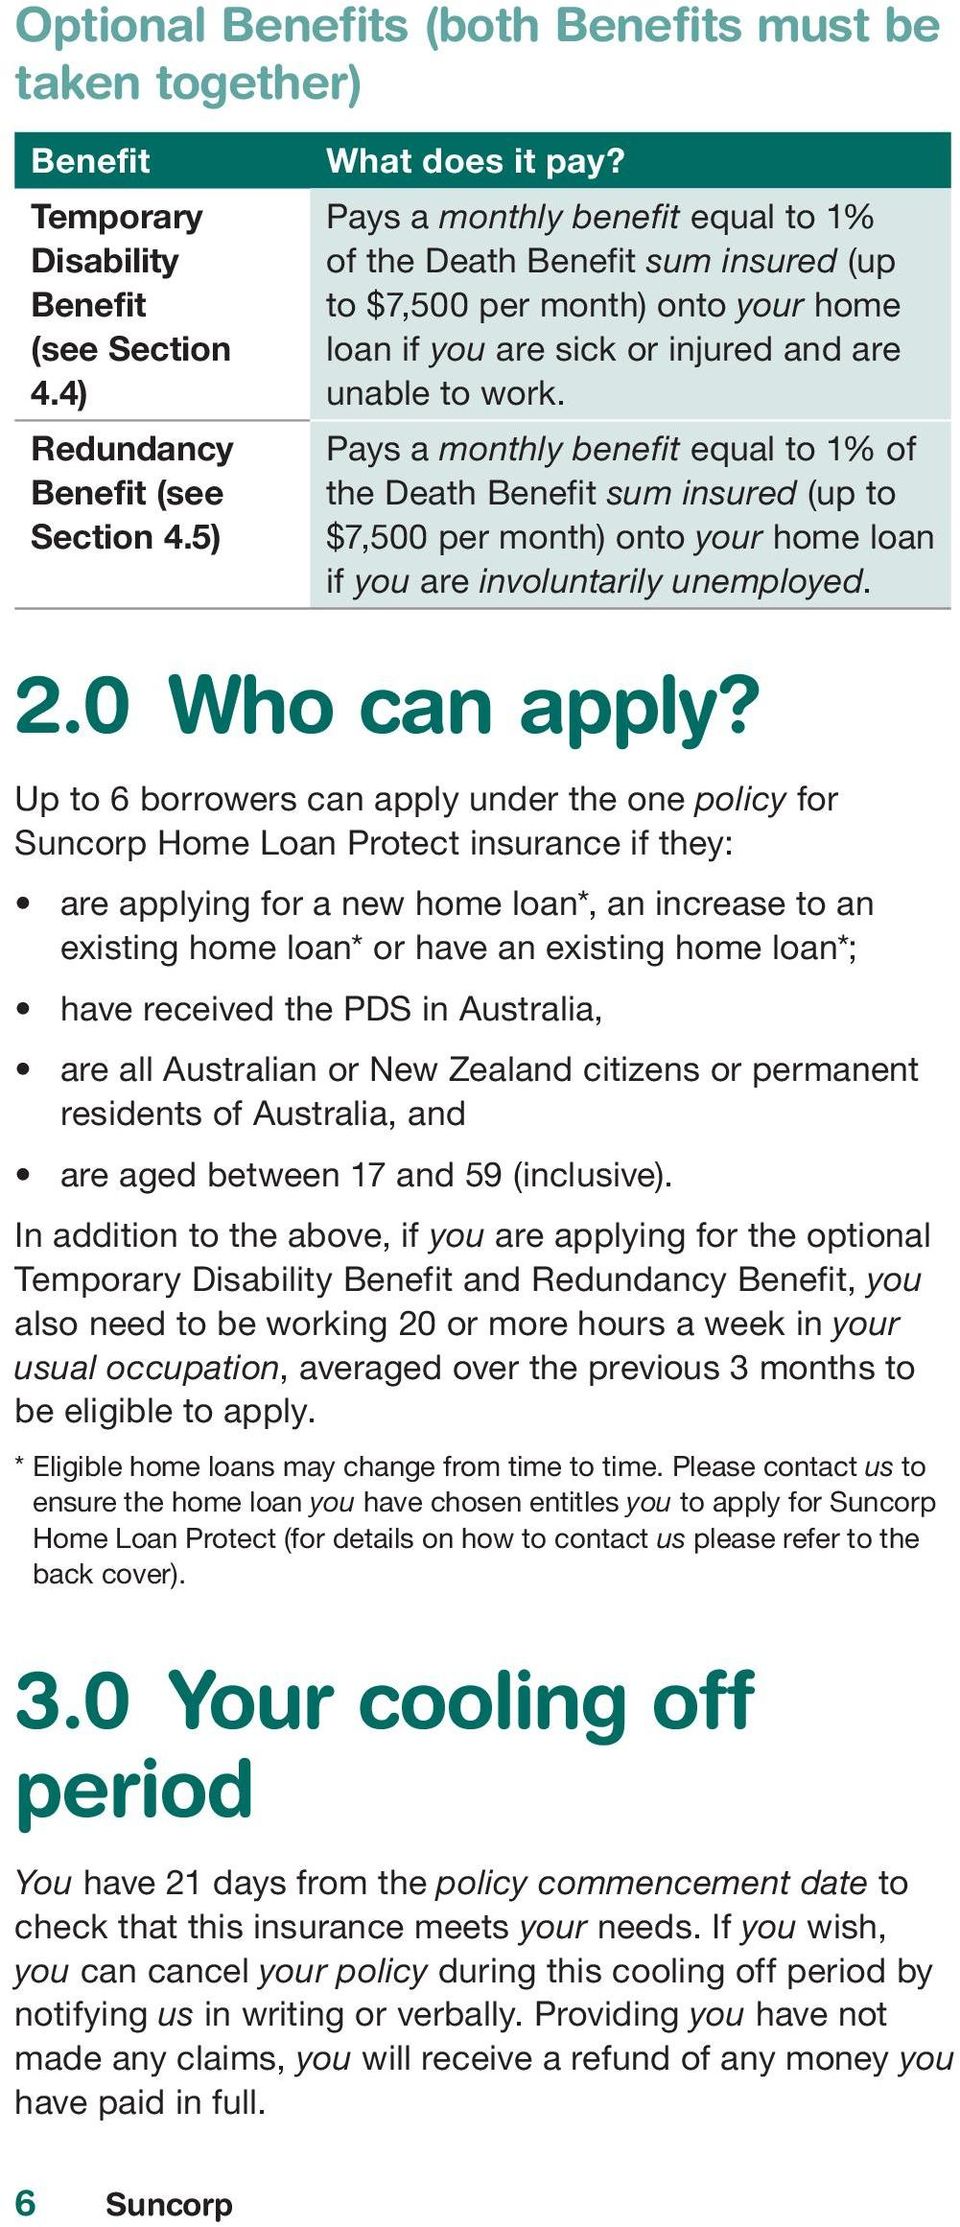 Pays a monthly benefit equal to 1% of the Death Benefit sum insured (up to $7,500 per month) onto your home loan if you are involuntarily unemployed. 2.0 Who can apply?